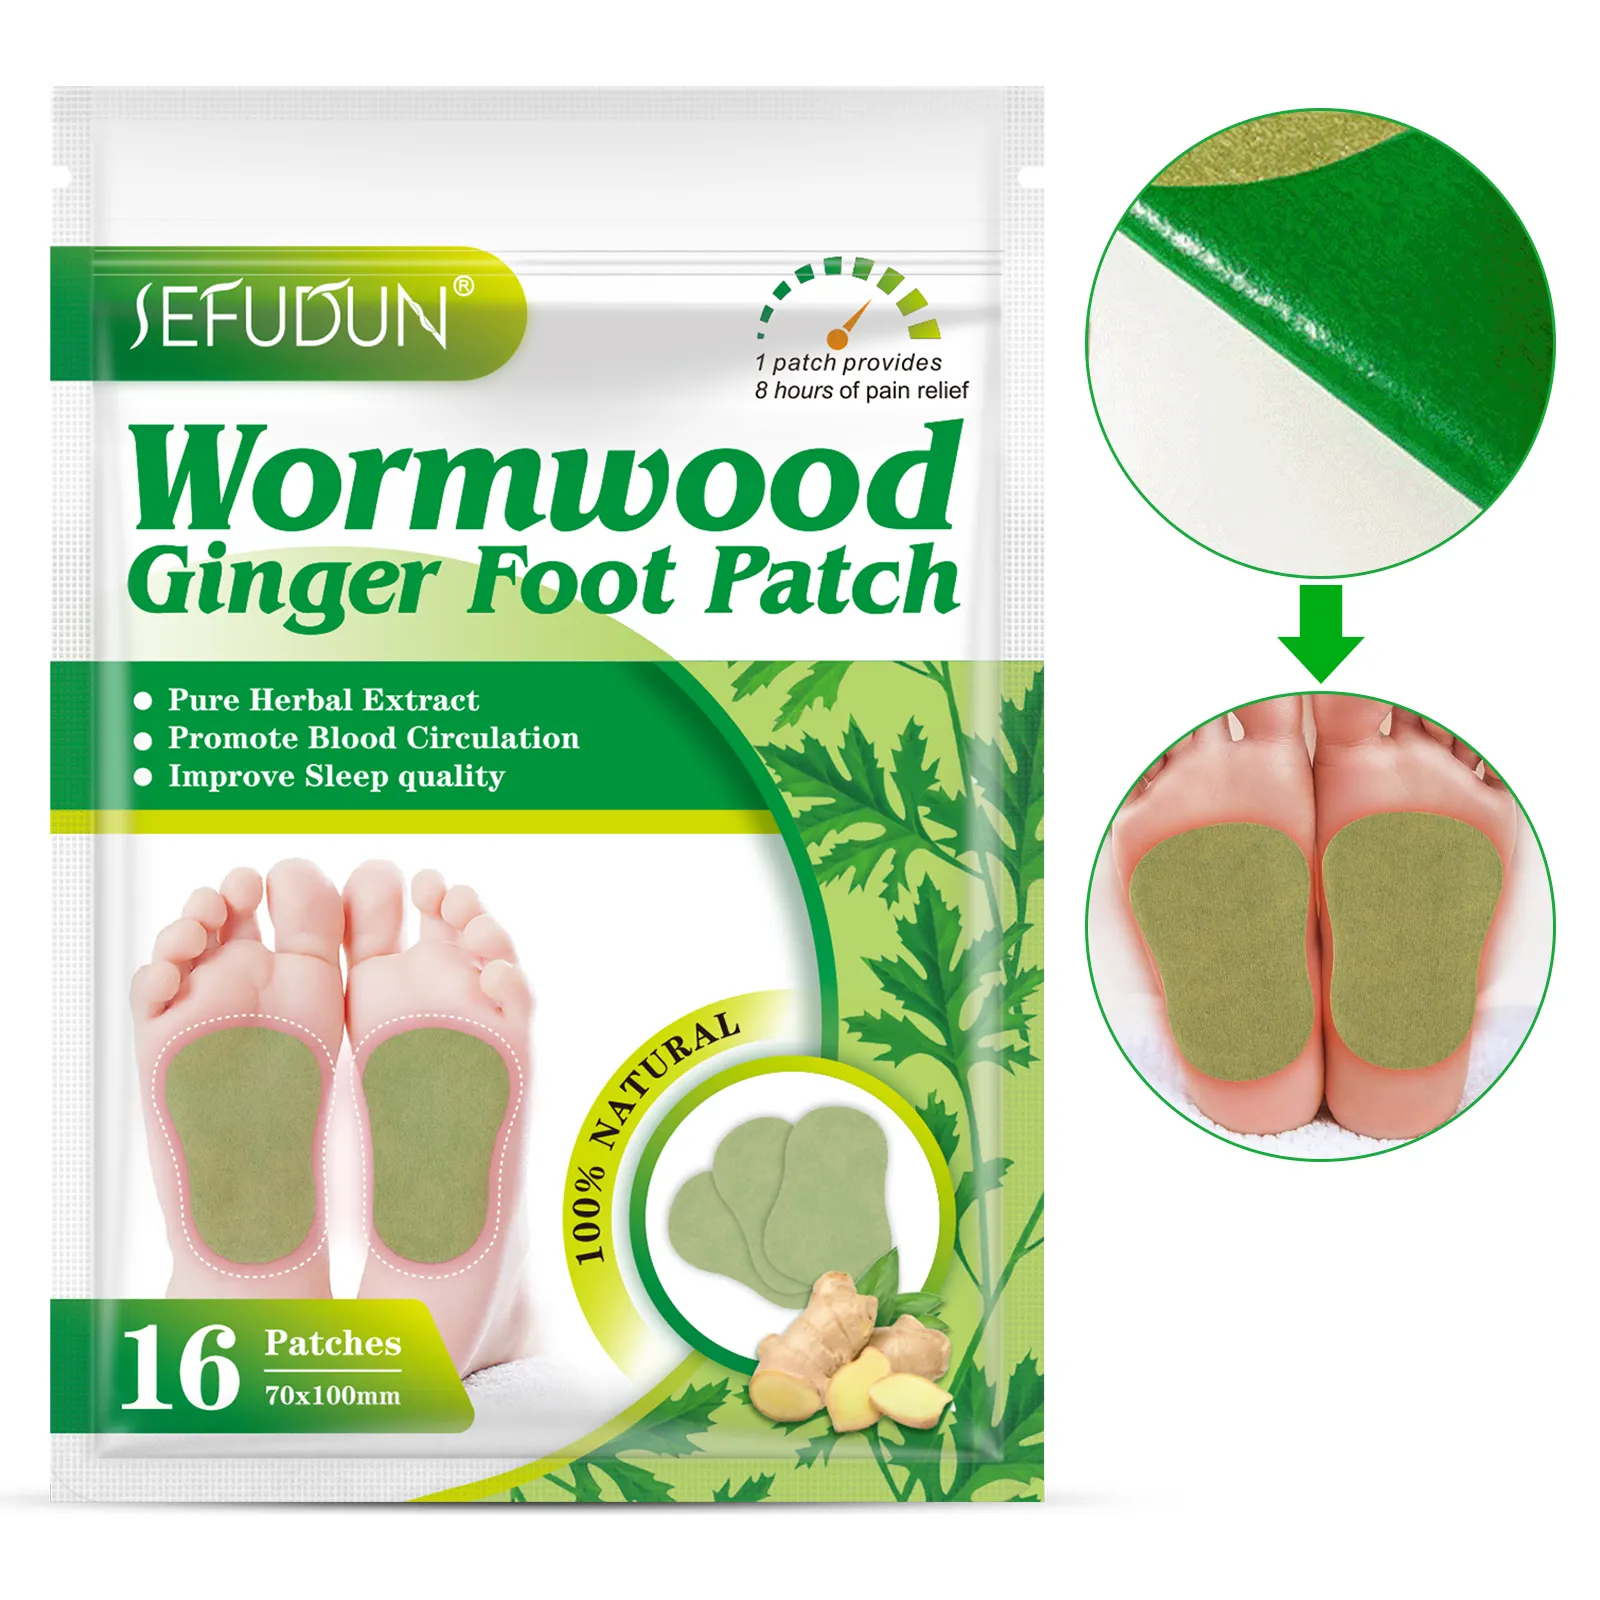 SEFUDUN Pure Natural Wormwood Ginger Foot Patch Detoxification Skin-friendly Soft Pain Relief Foot Patches